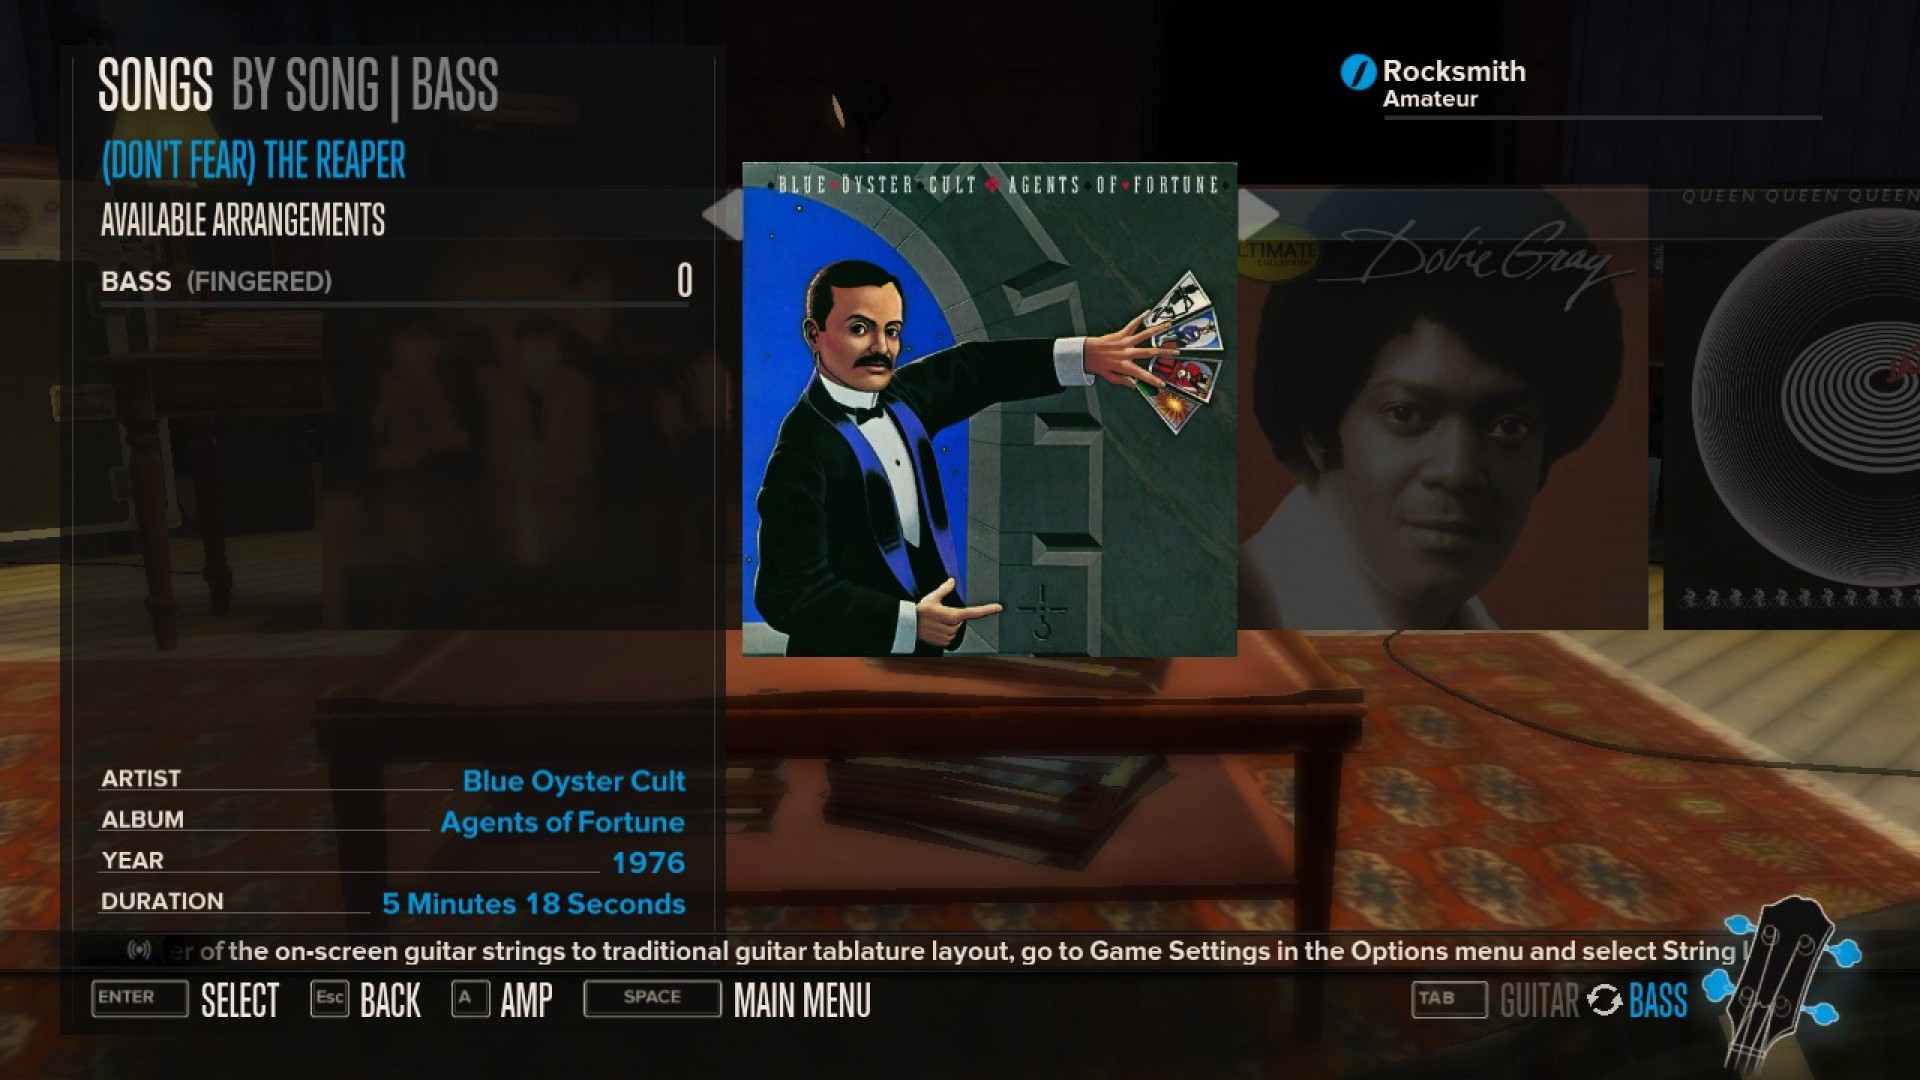 Rocksmith - Blue Oyster Cult - (Don't Fear) The Reaper screenshot